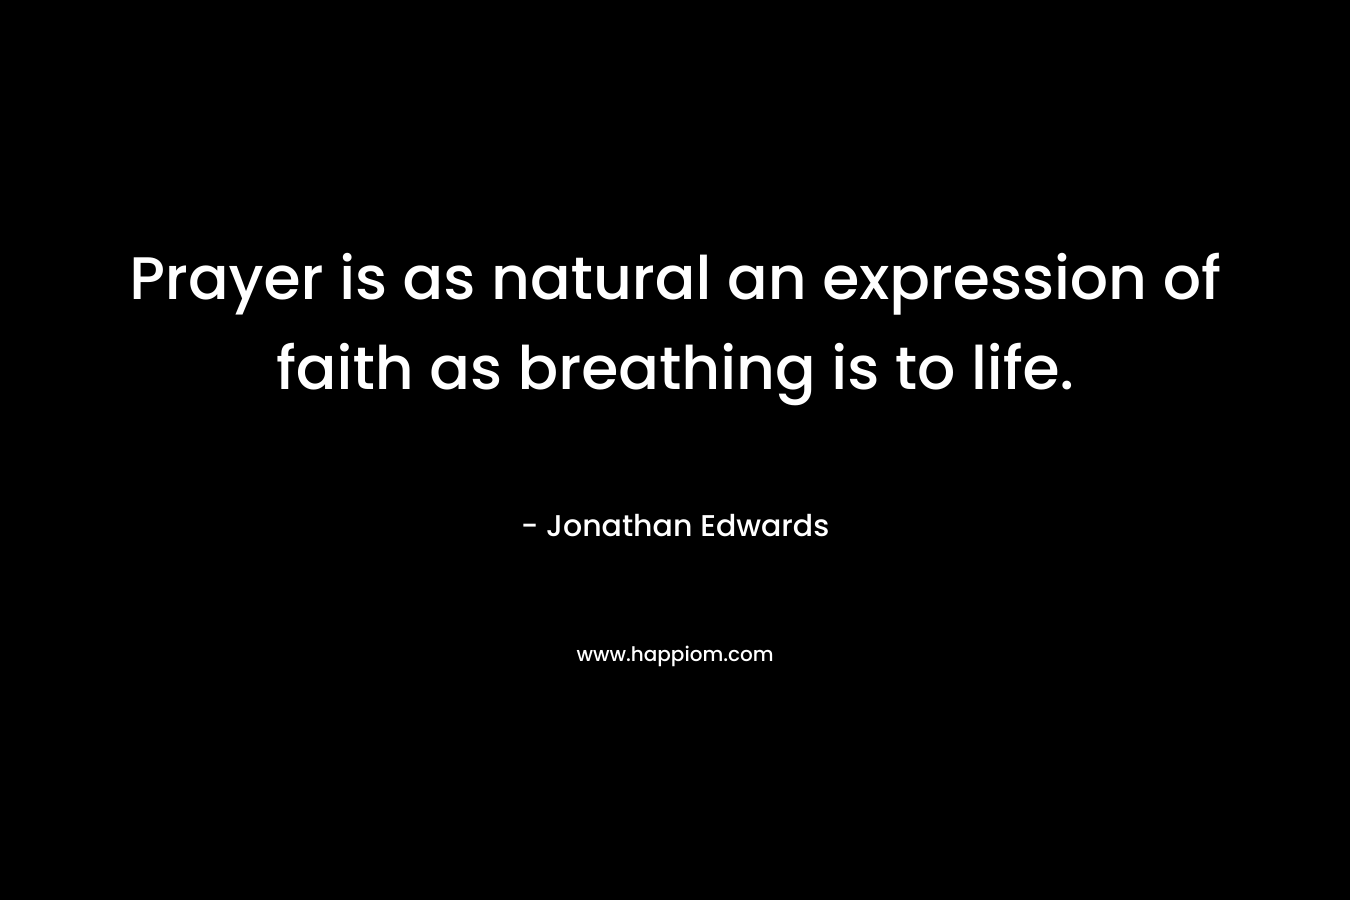 Prayer is as natural an expression of faith as breathing is to life. – Jonathan Edwards